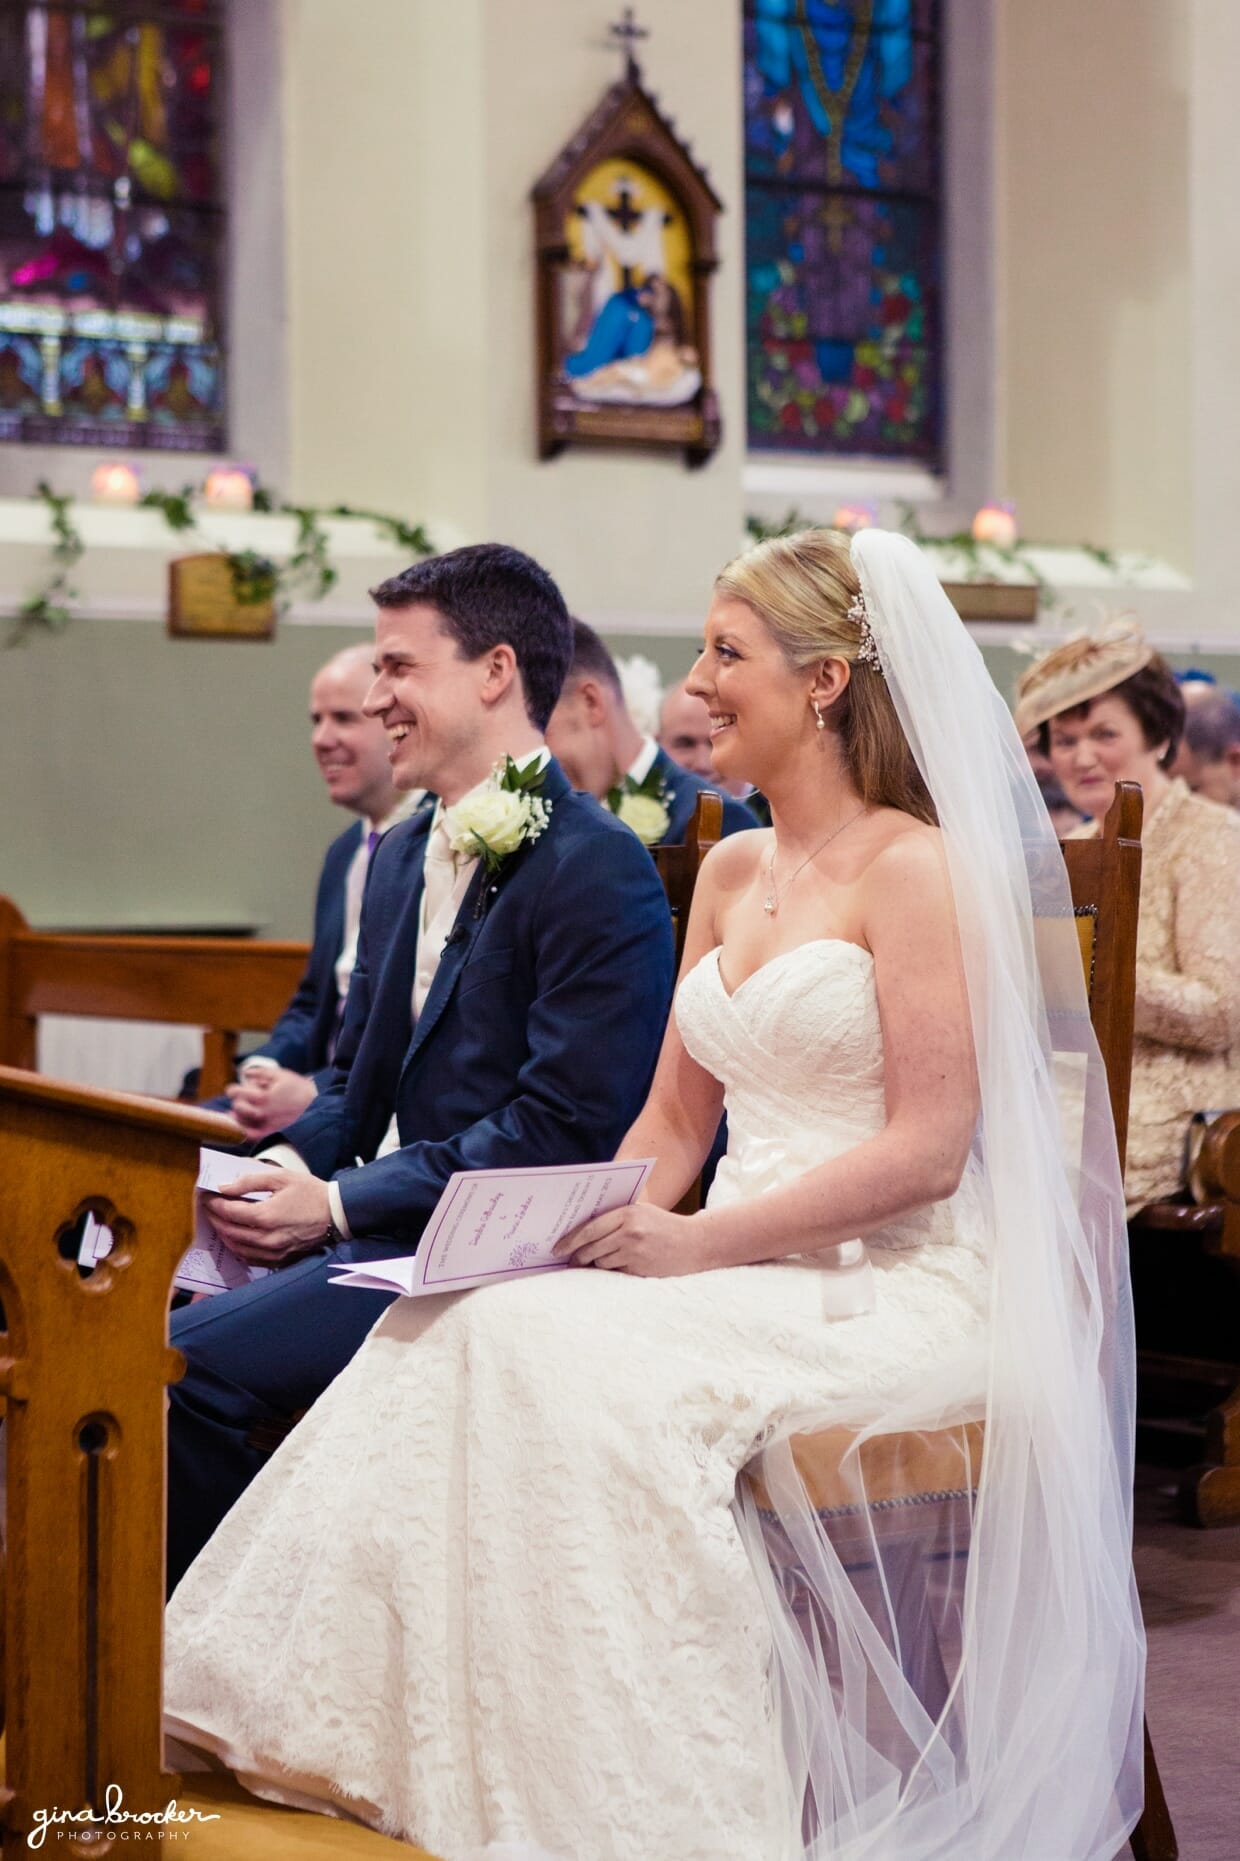 The bride and groom share a funny moment during their intimate church wedding